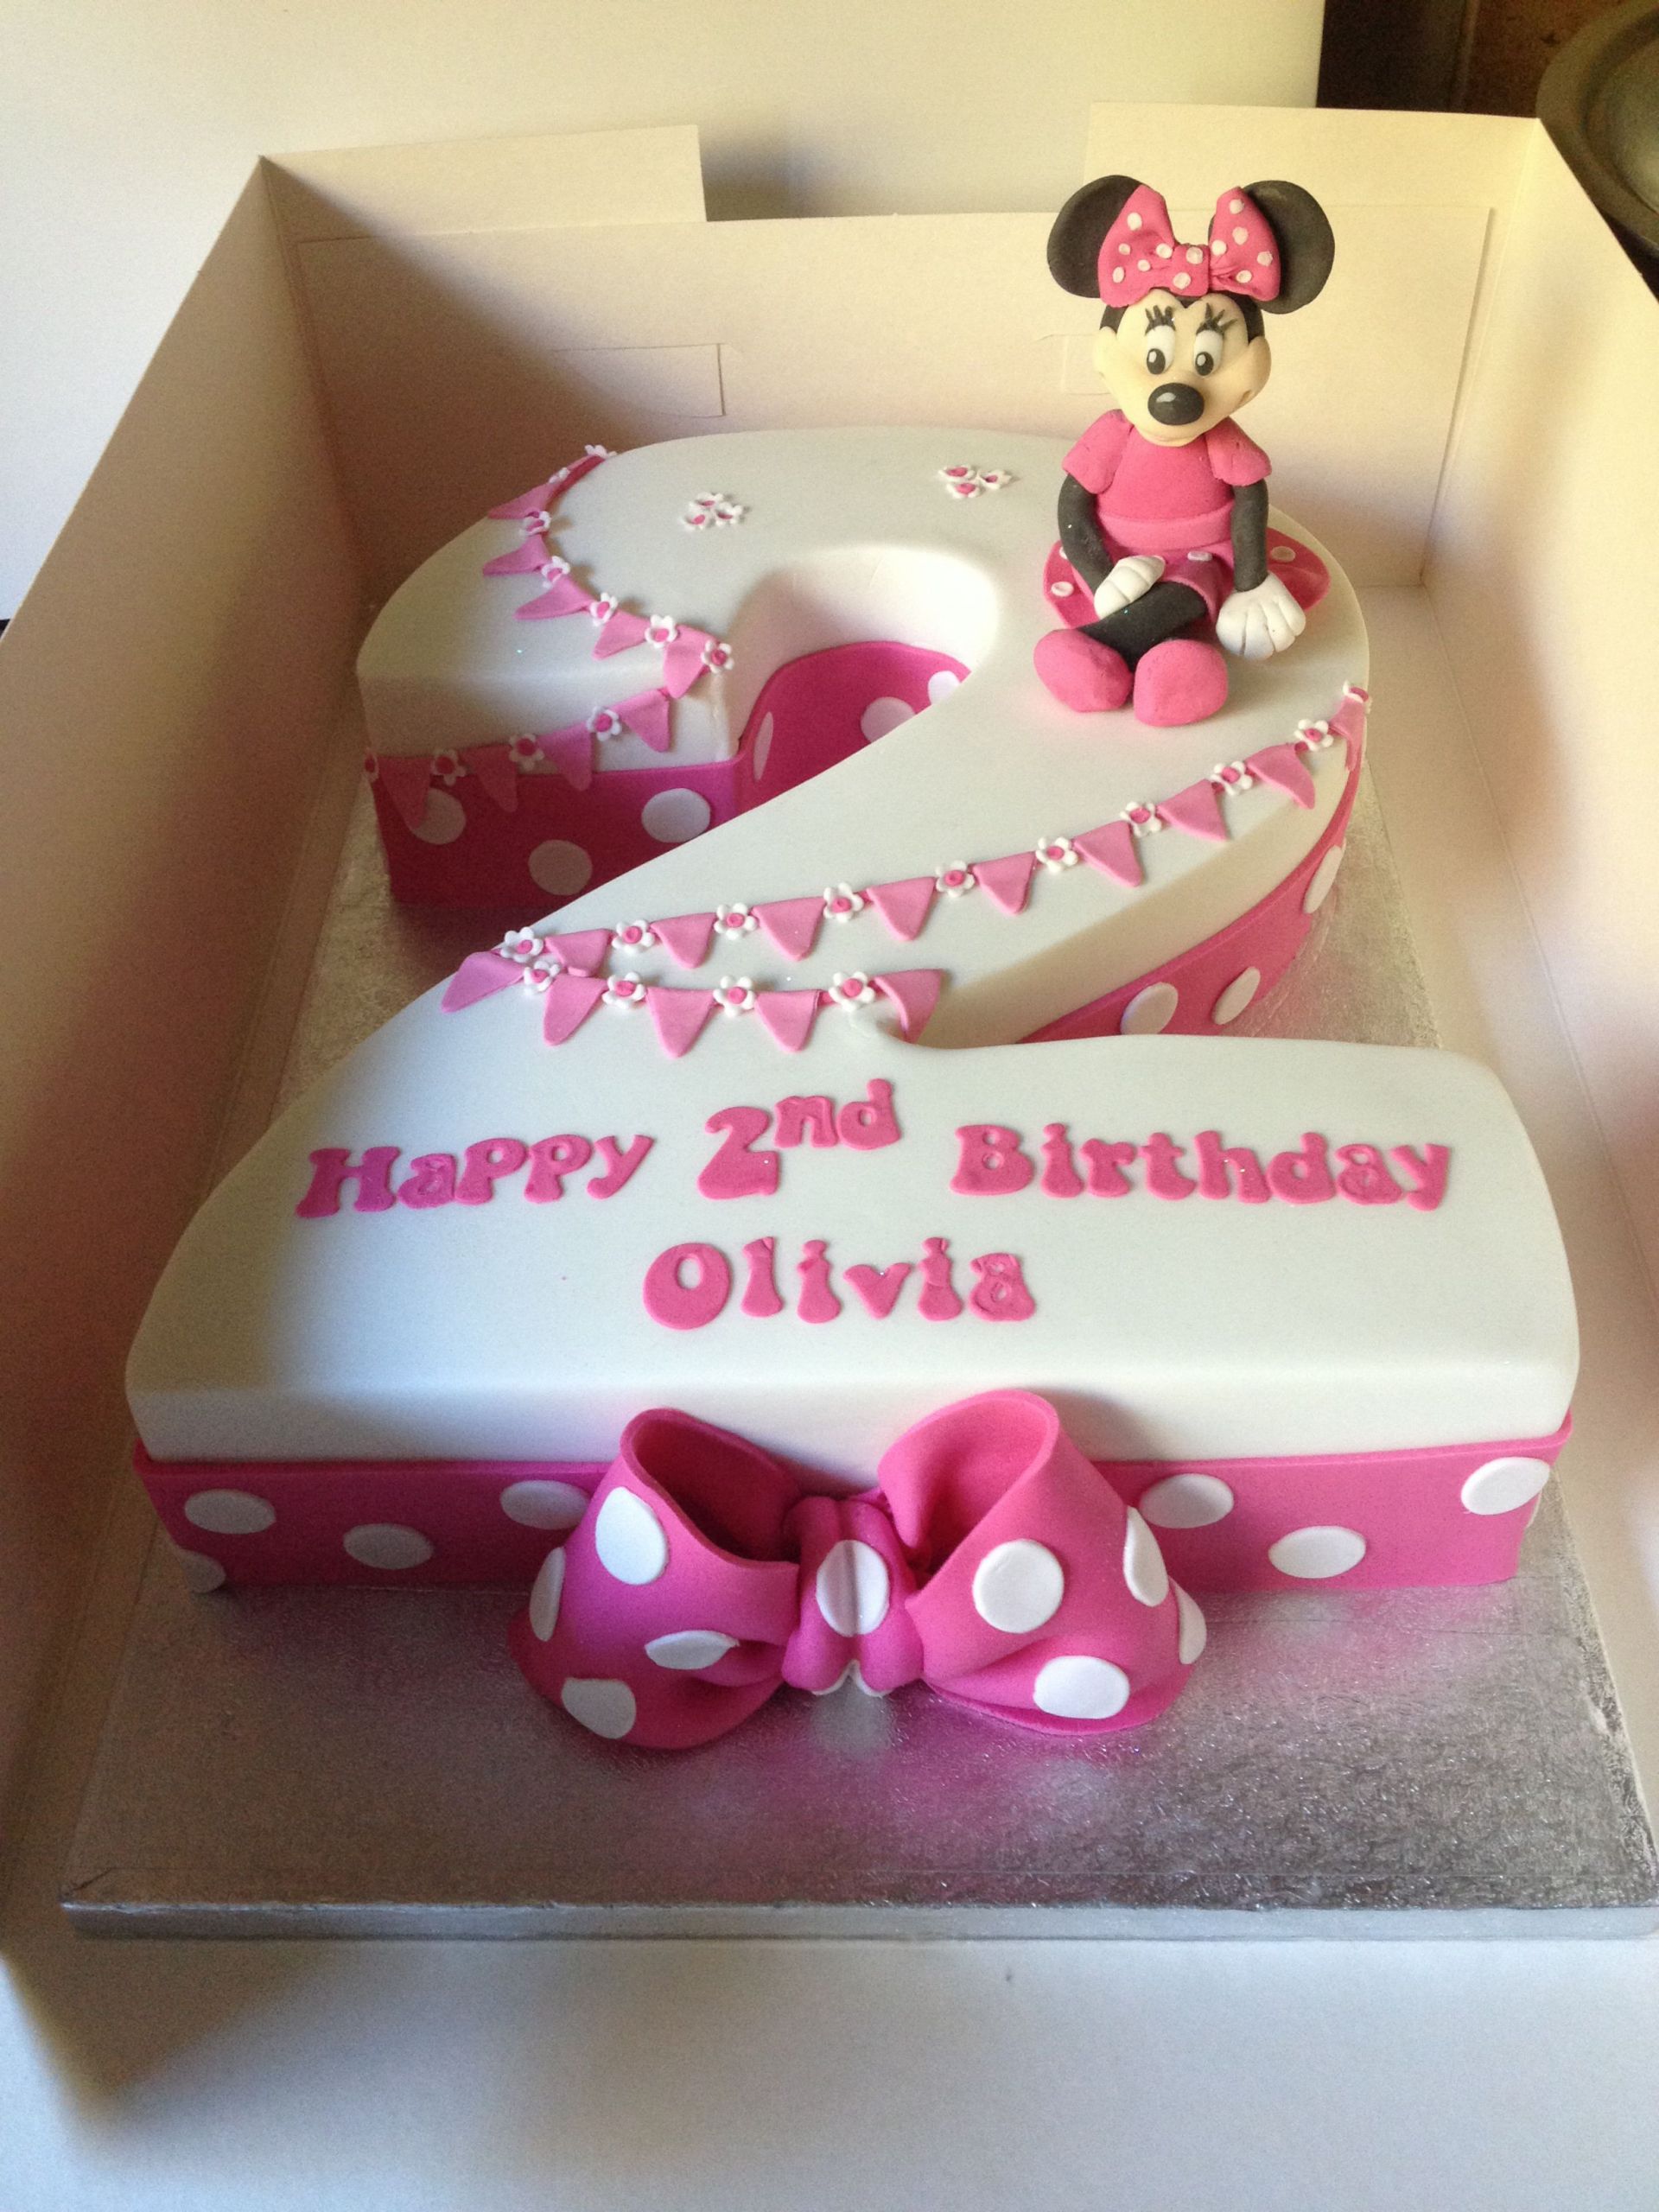 2nd Birthday Cake Ideas
 This is the one I want for my Skylar one her second